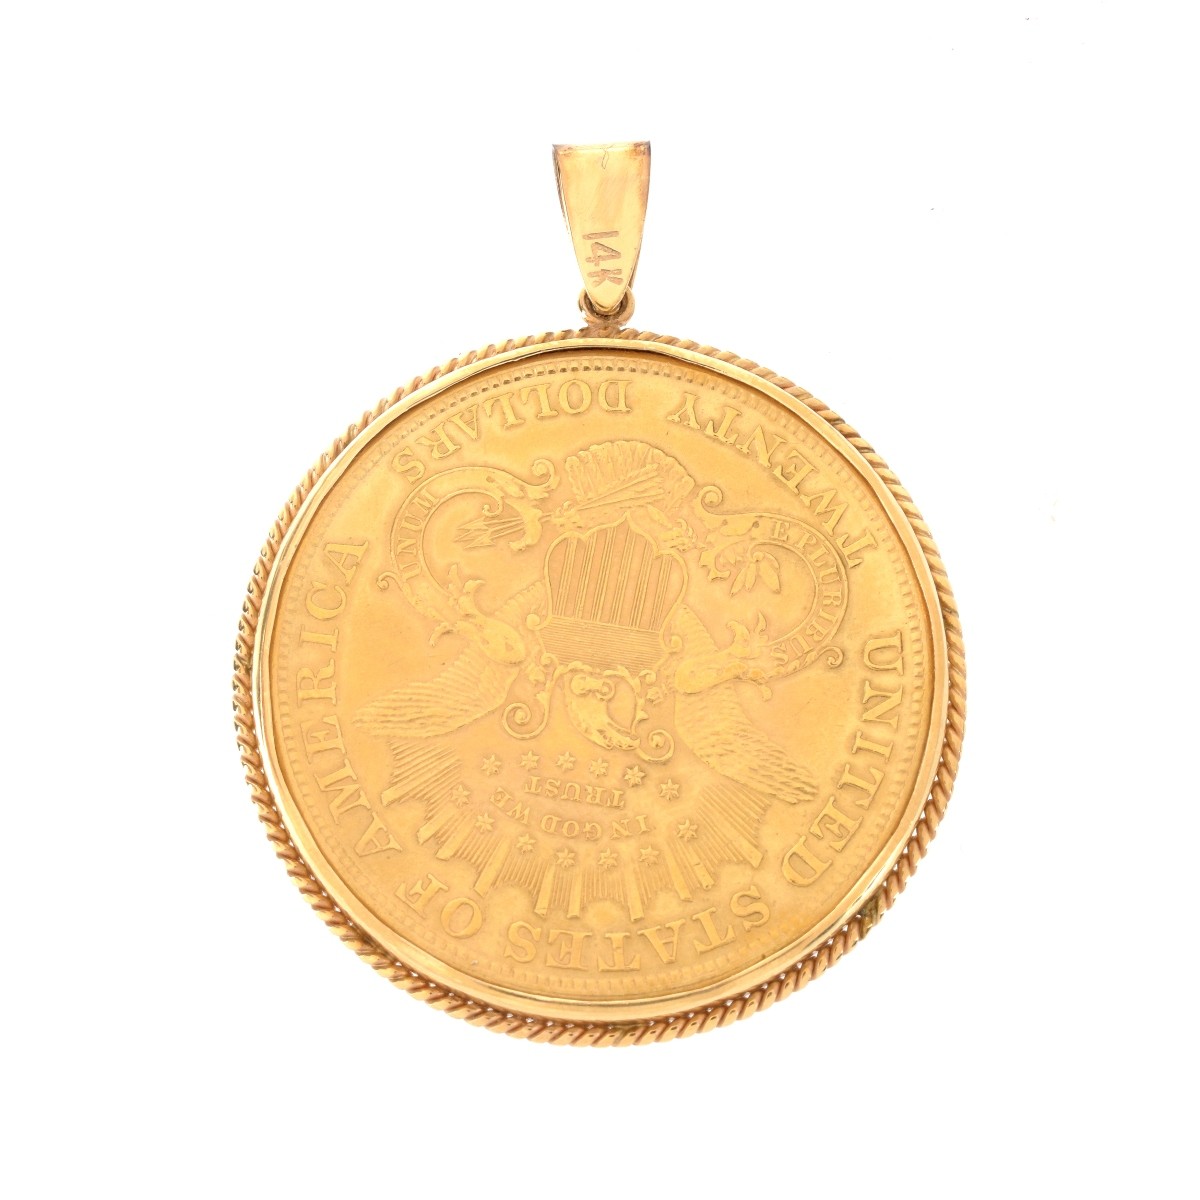 1879 US $20 Gold Coin Pendant